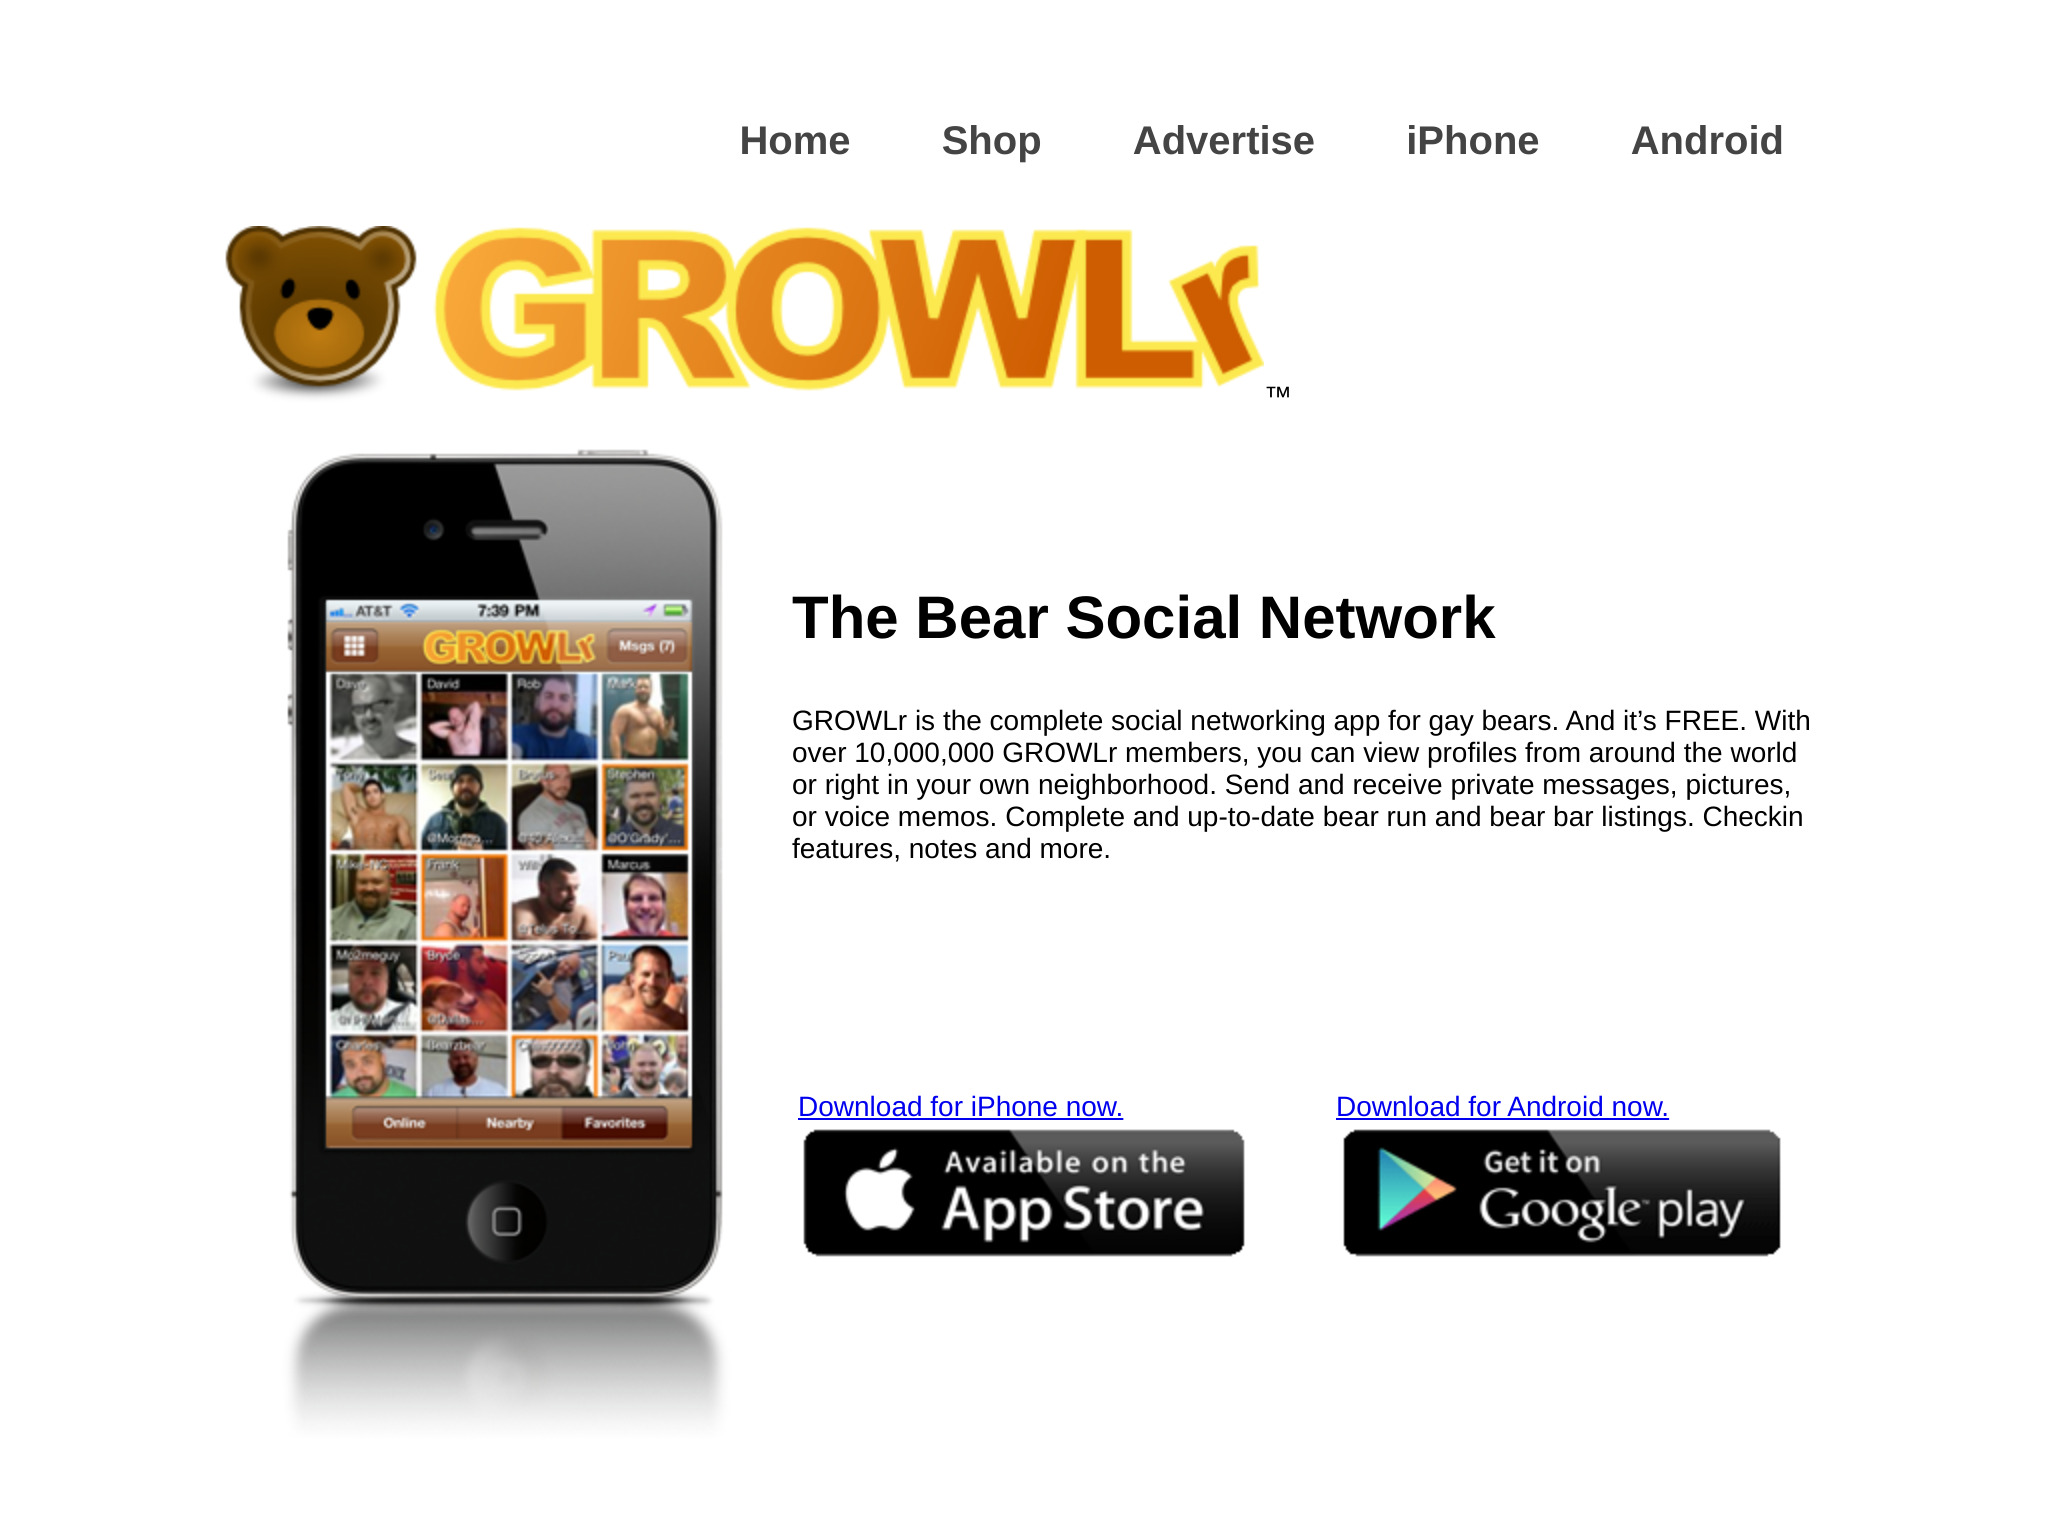 Growlr Review: What You Need To Know Before Signing Up